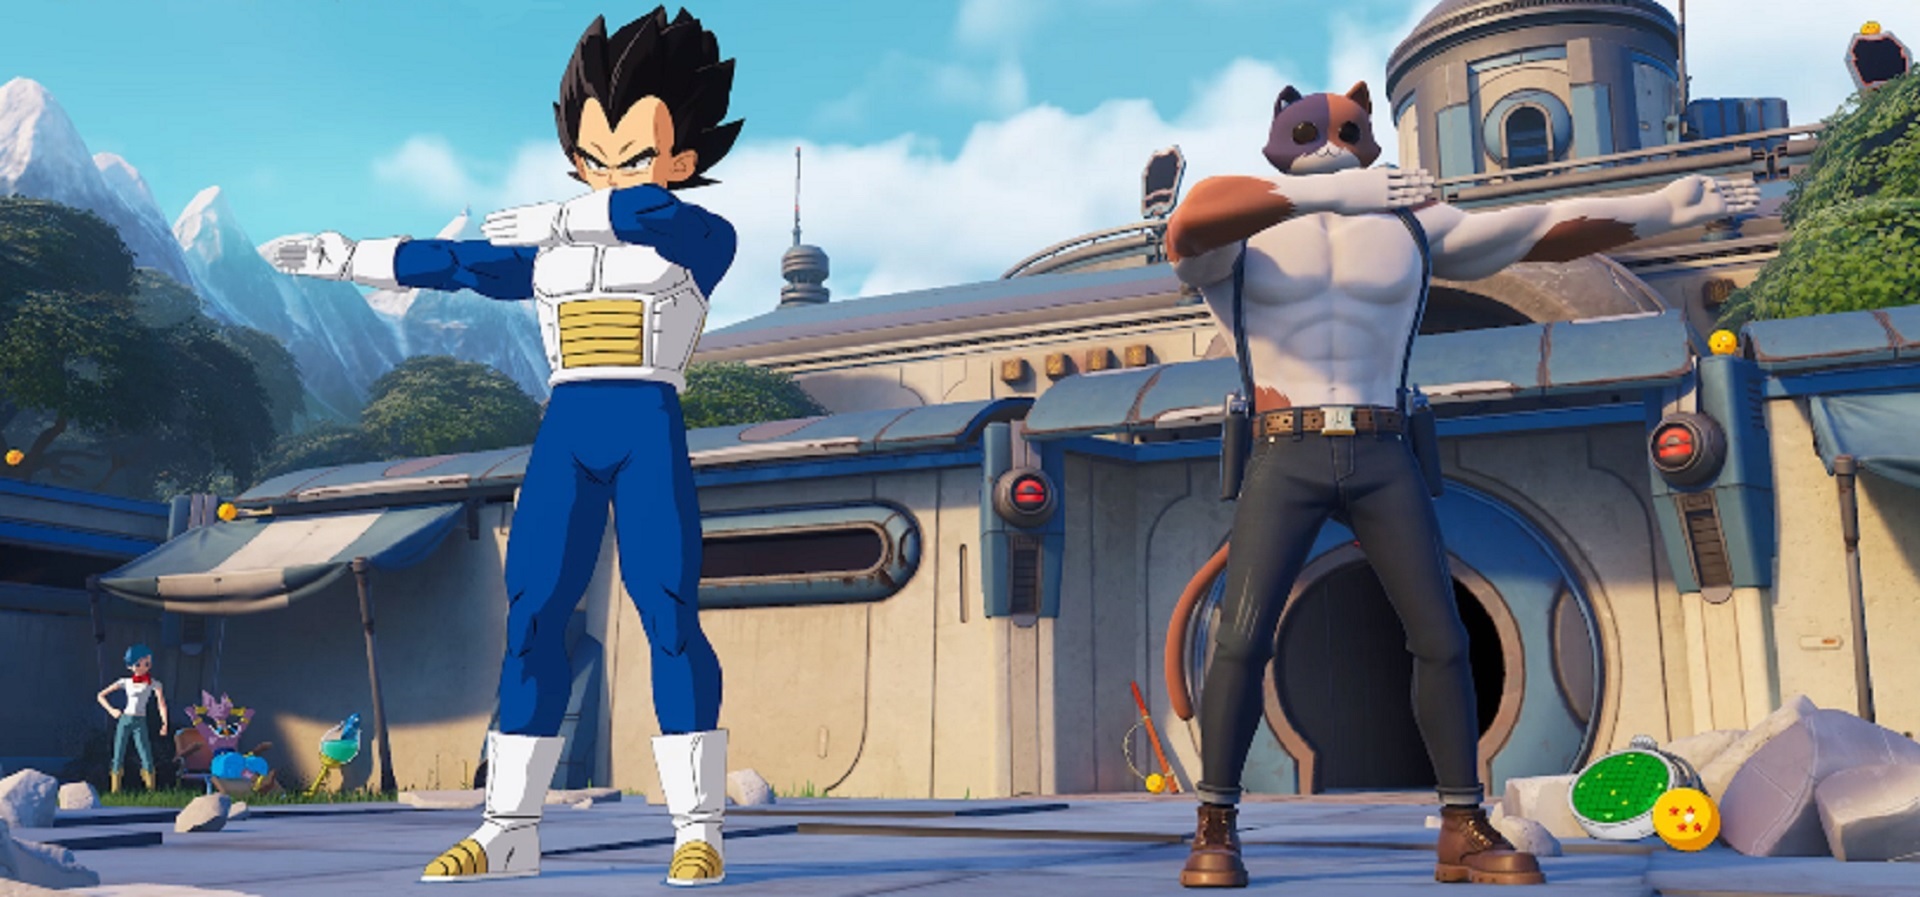  It's time to go Super Saiyan in the Fortnite x Dragon Ball crossover event 